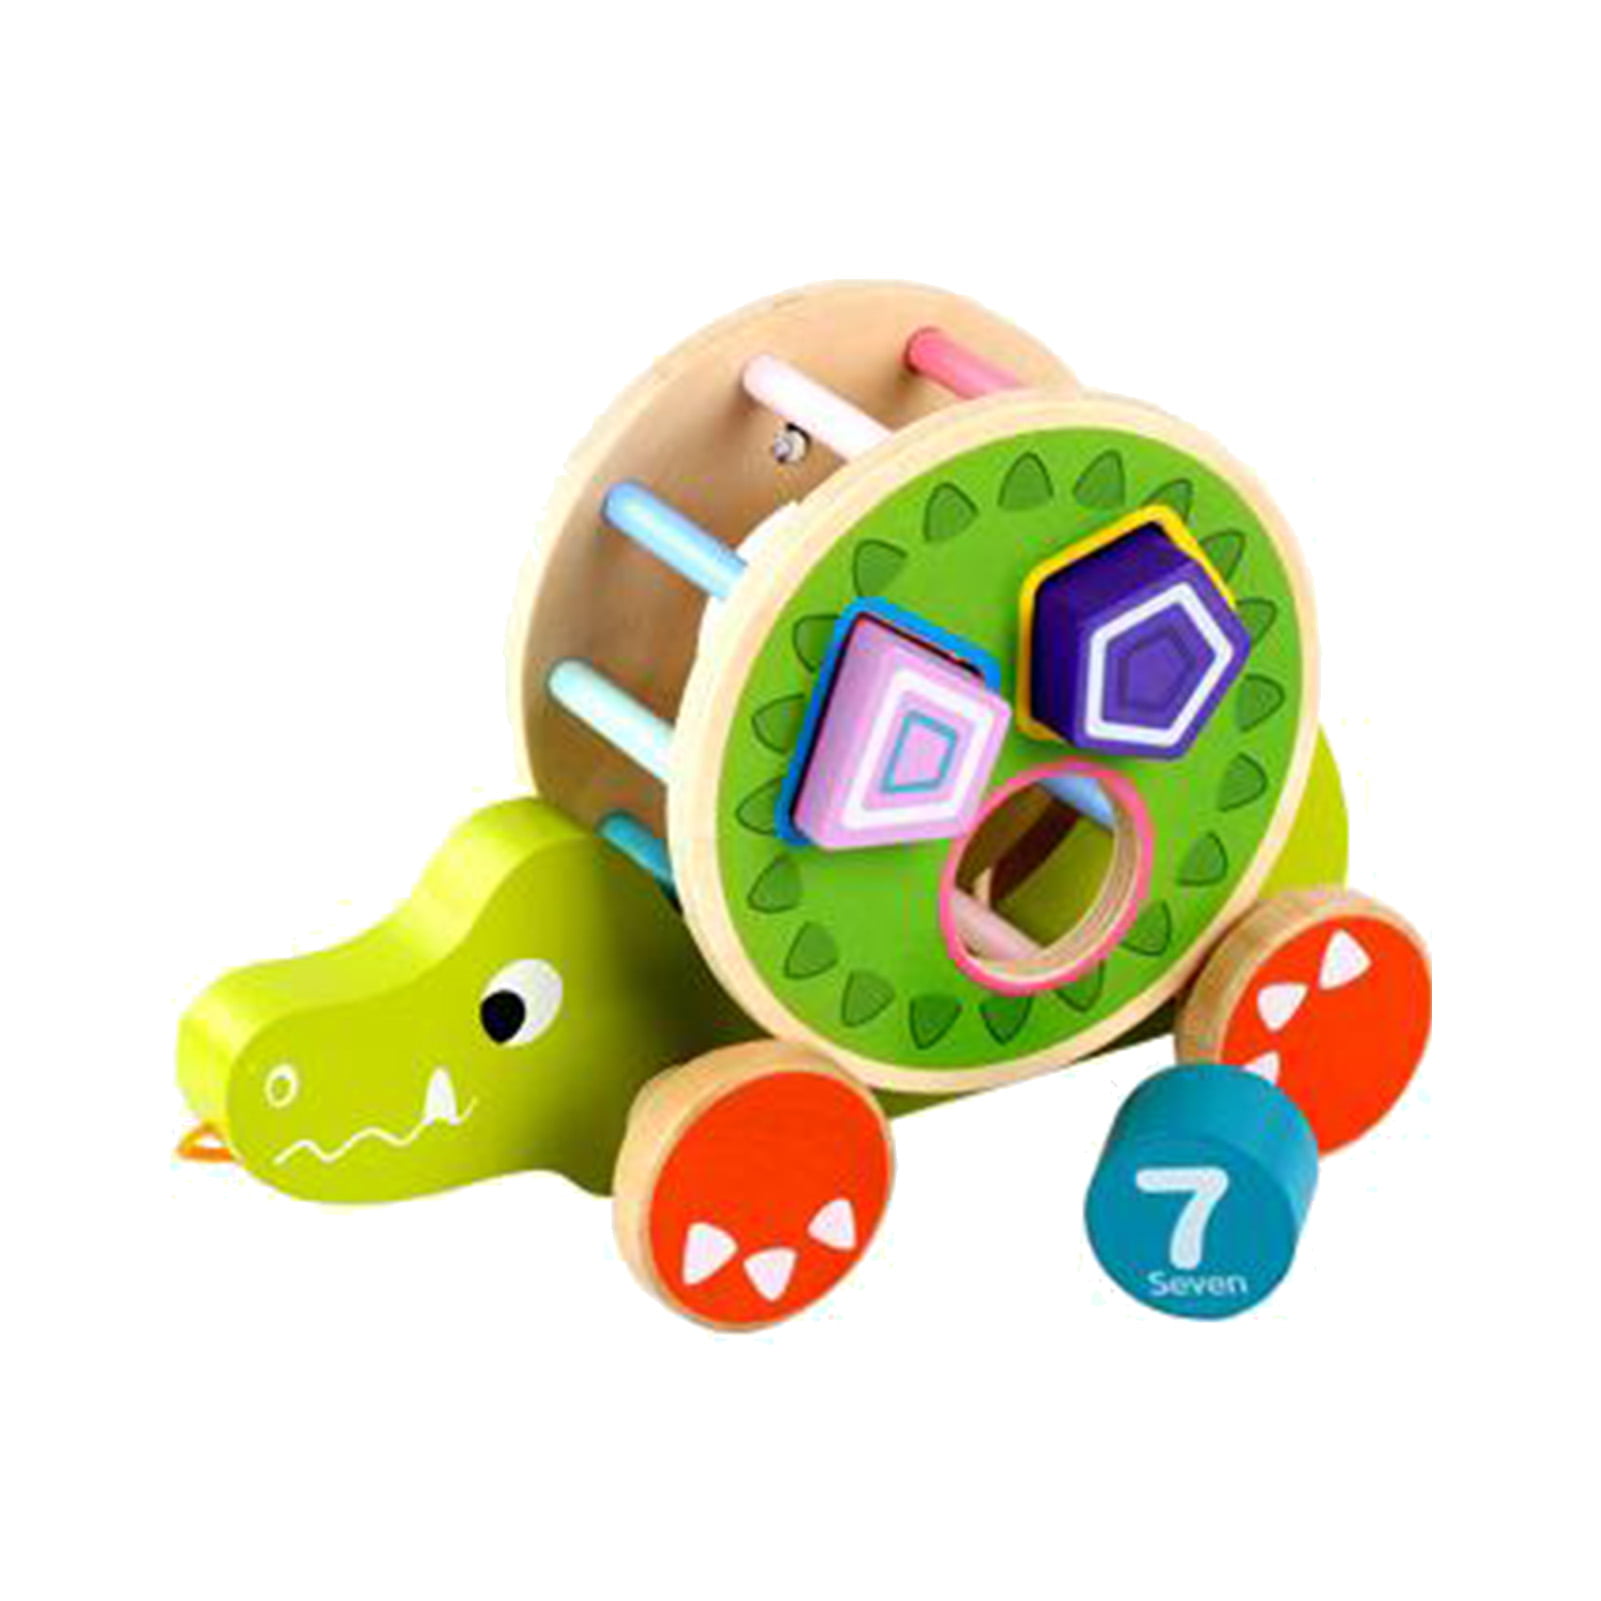 L Green 4.7, Hape Frog Pull-Along | Wooden Frog Fly Eating Pull Toddler Toy 